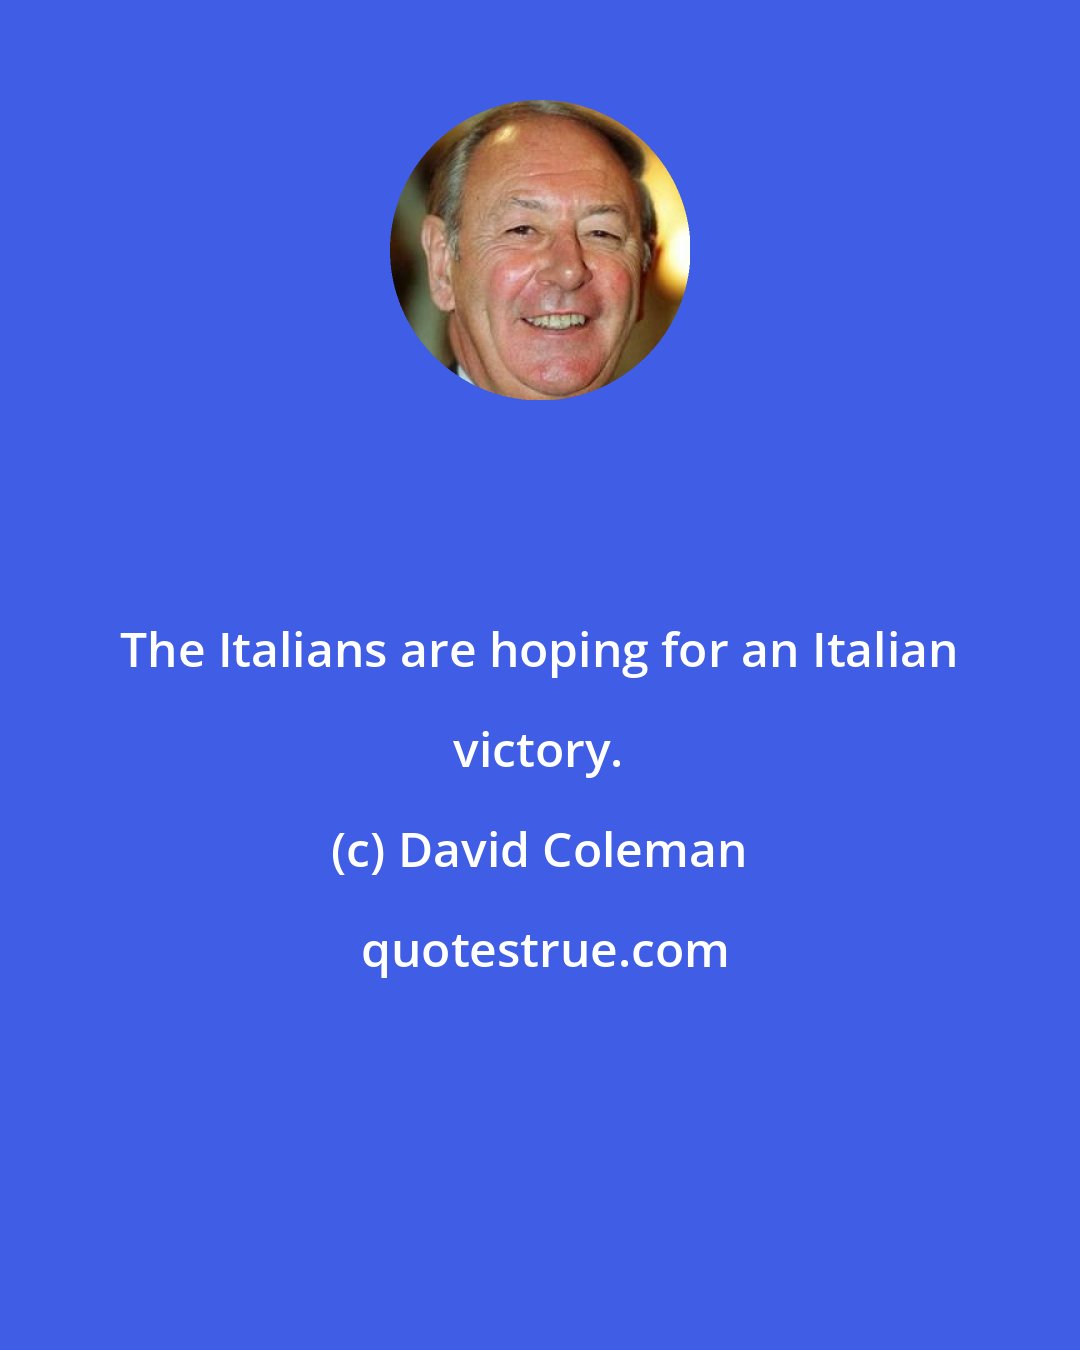 David Coleman: The Italians are hoping for an Italian victory.